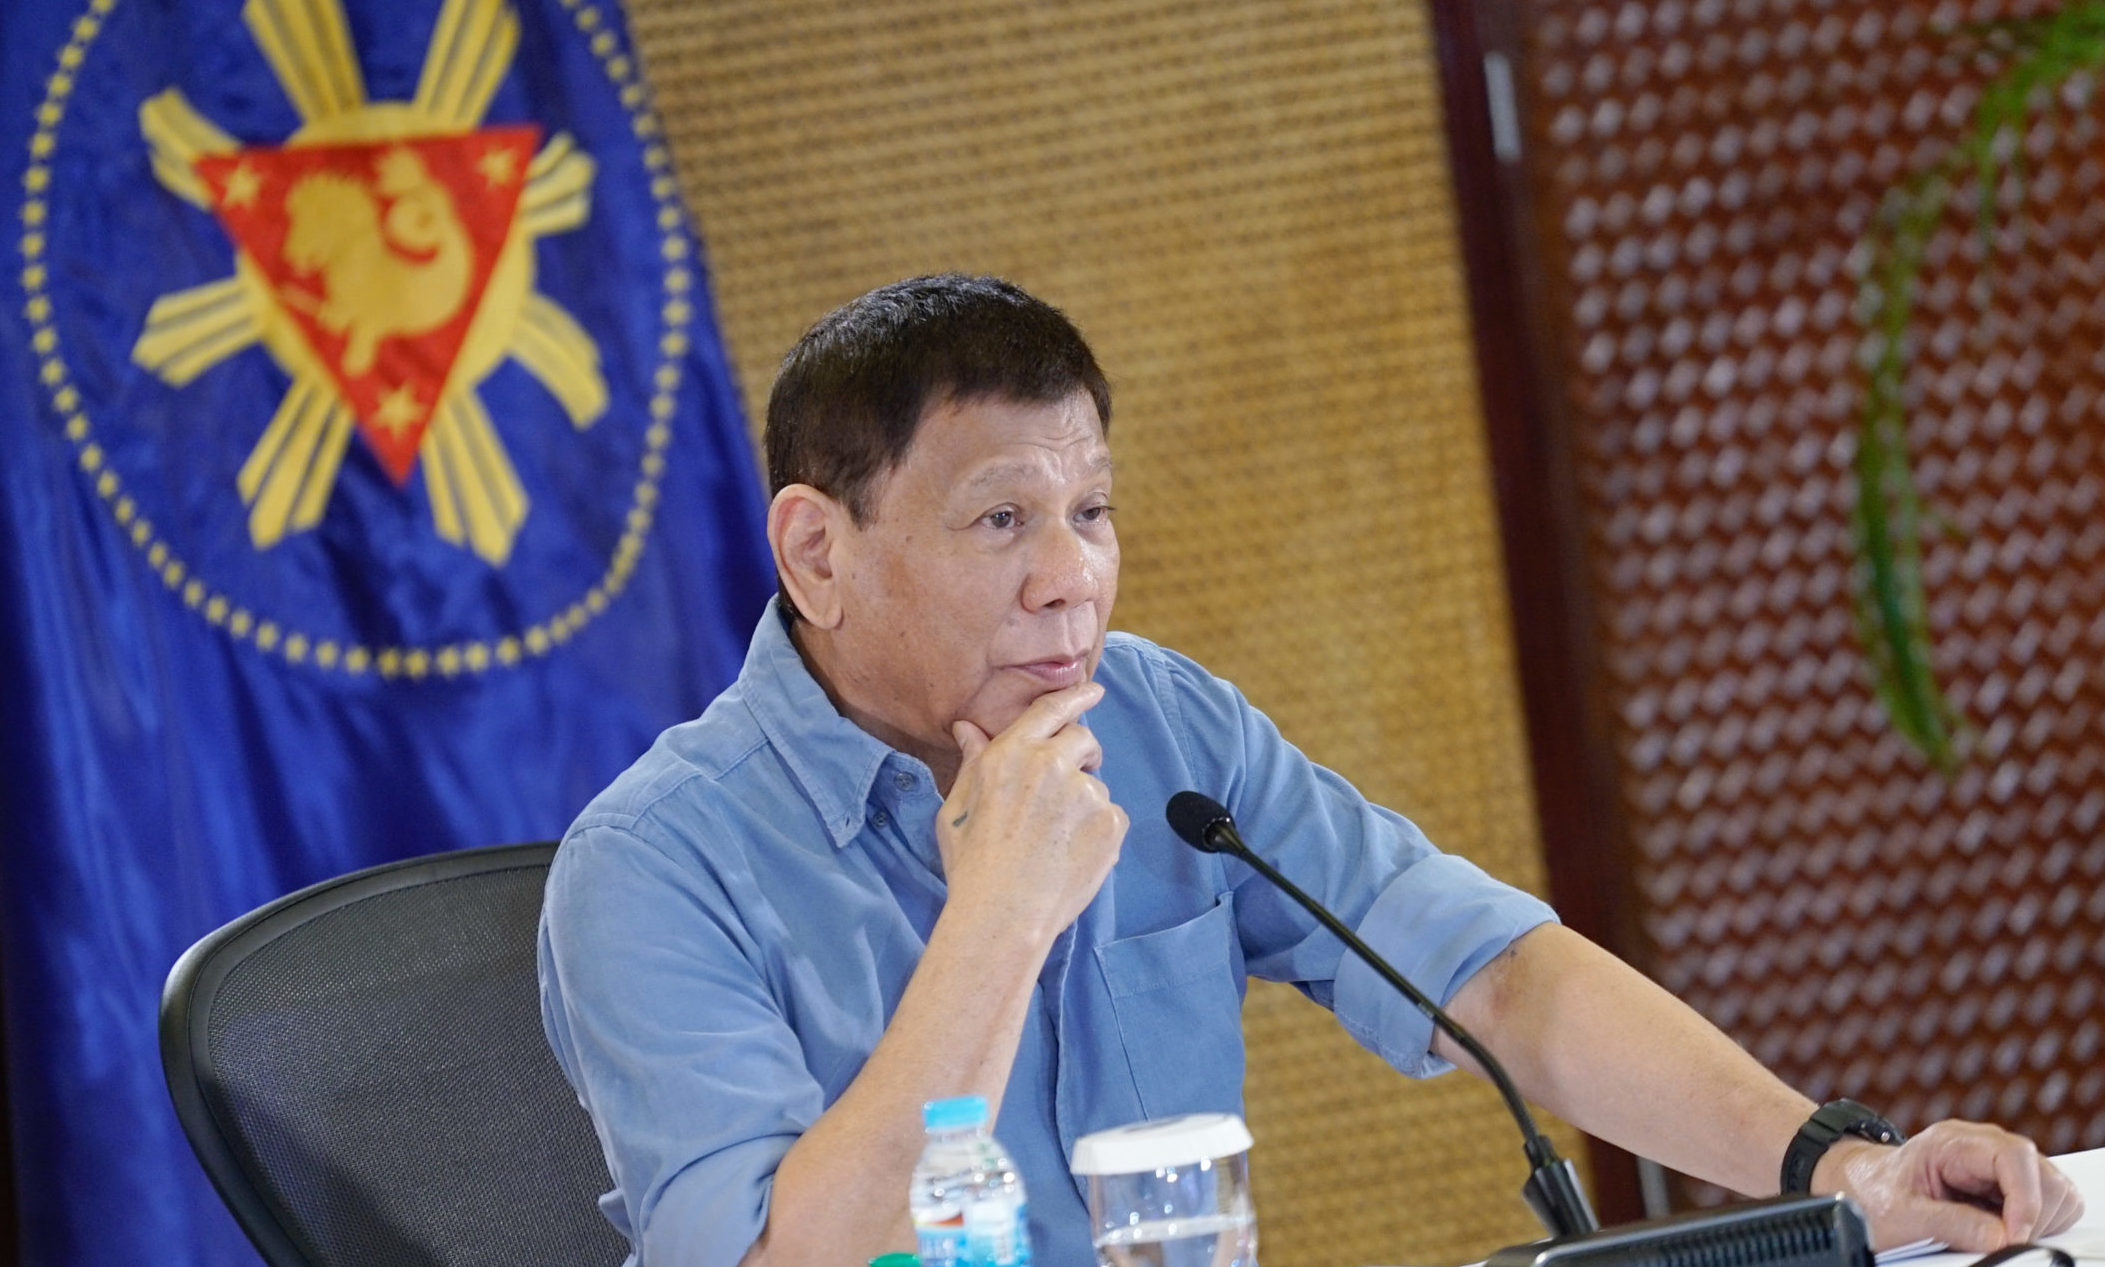 Duterte President Rodrigo Duterte said that individuals hesitant to receive a COVID-19 vaccine should be inoculated while asleep. blame for vax shortage